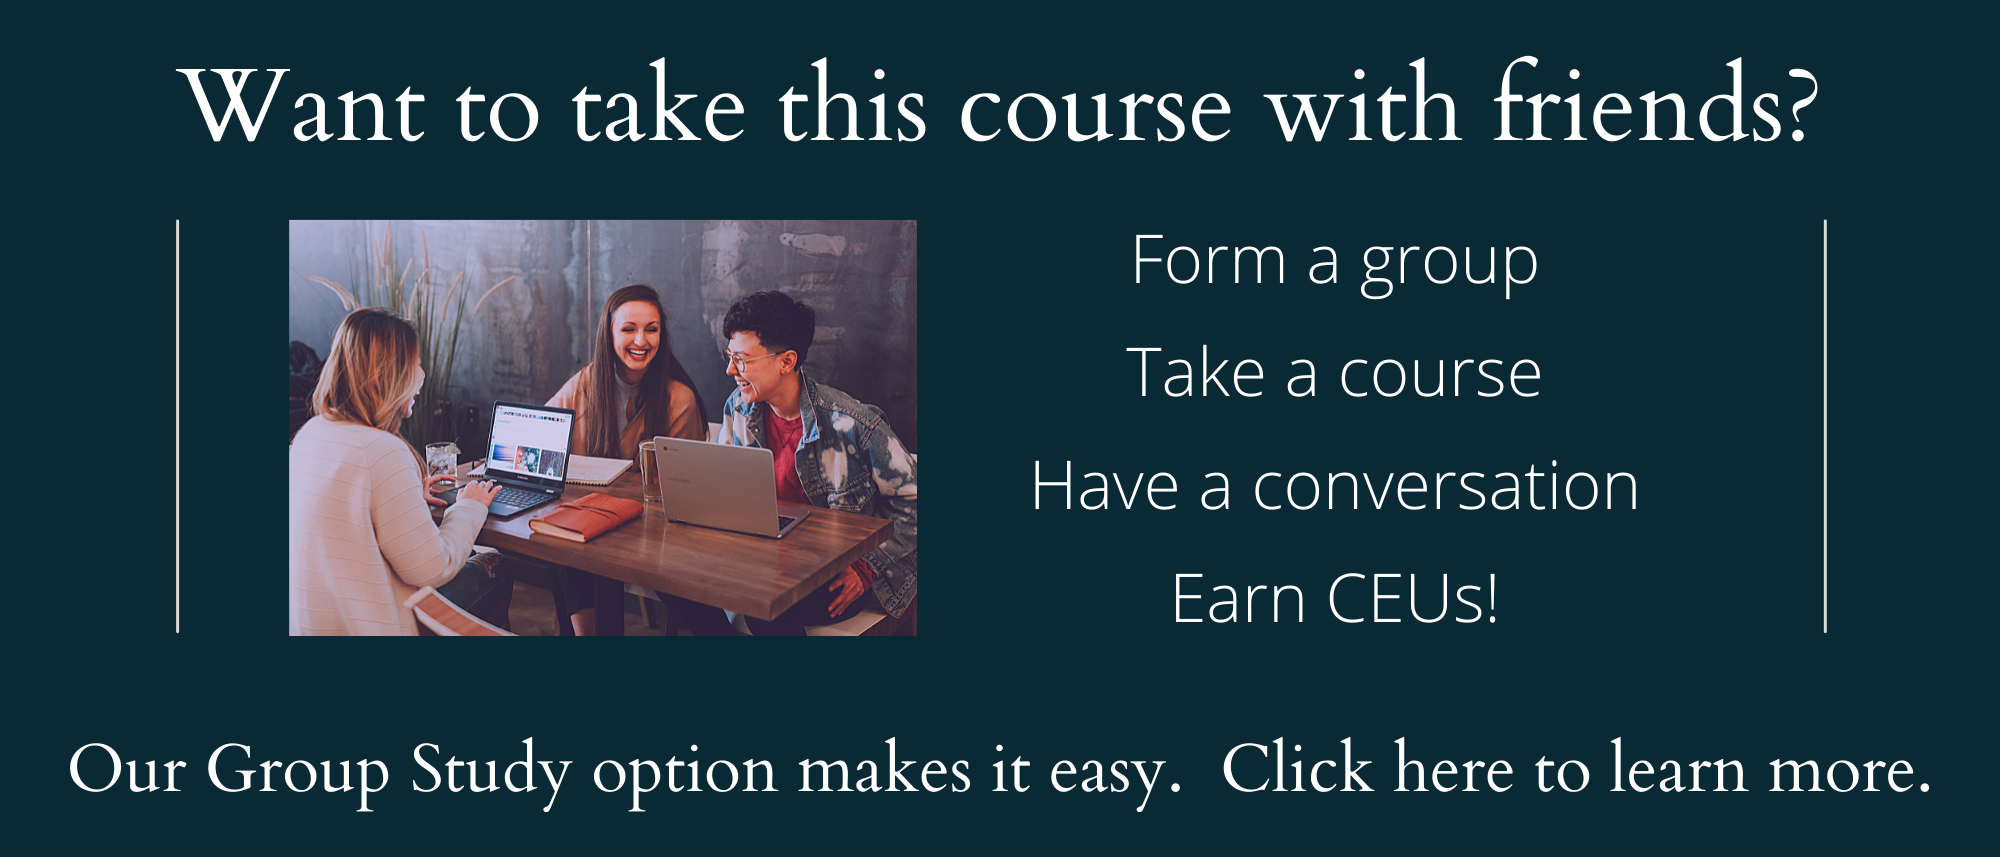 Learn with friends!  Have a conversation about this course with colleagues and earn additional CEUs.